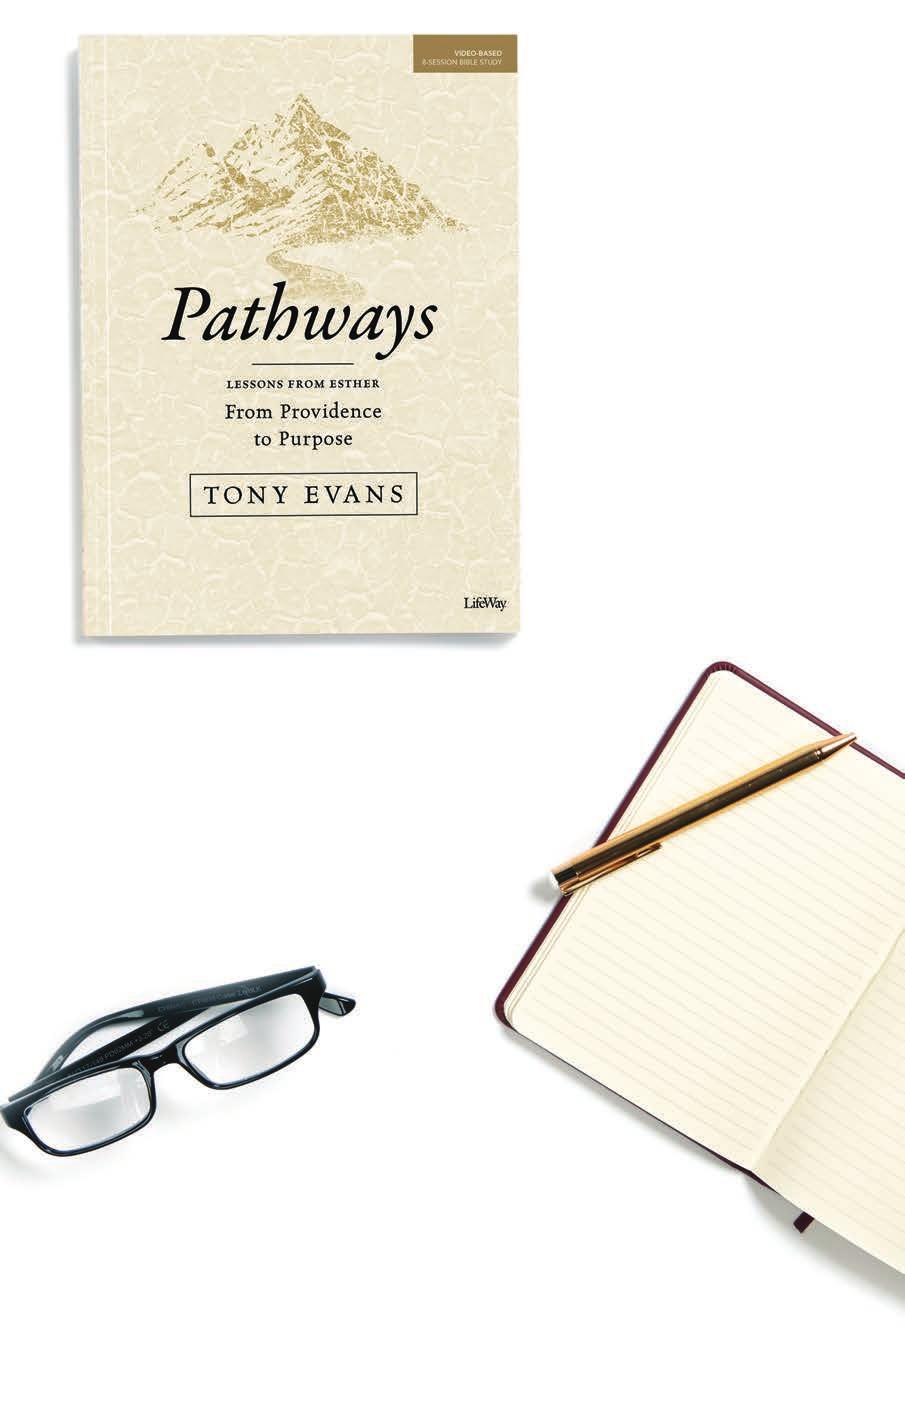 Pathways Bible Study Tony Evans Learn how to find God within what feels like His absence, and position yourself on God s pathway of purpose for your life.